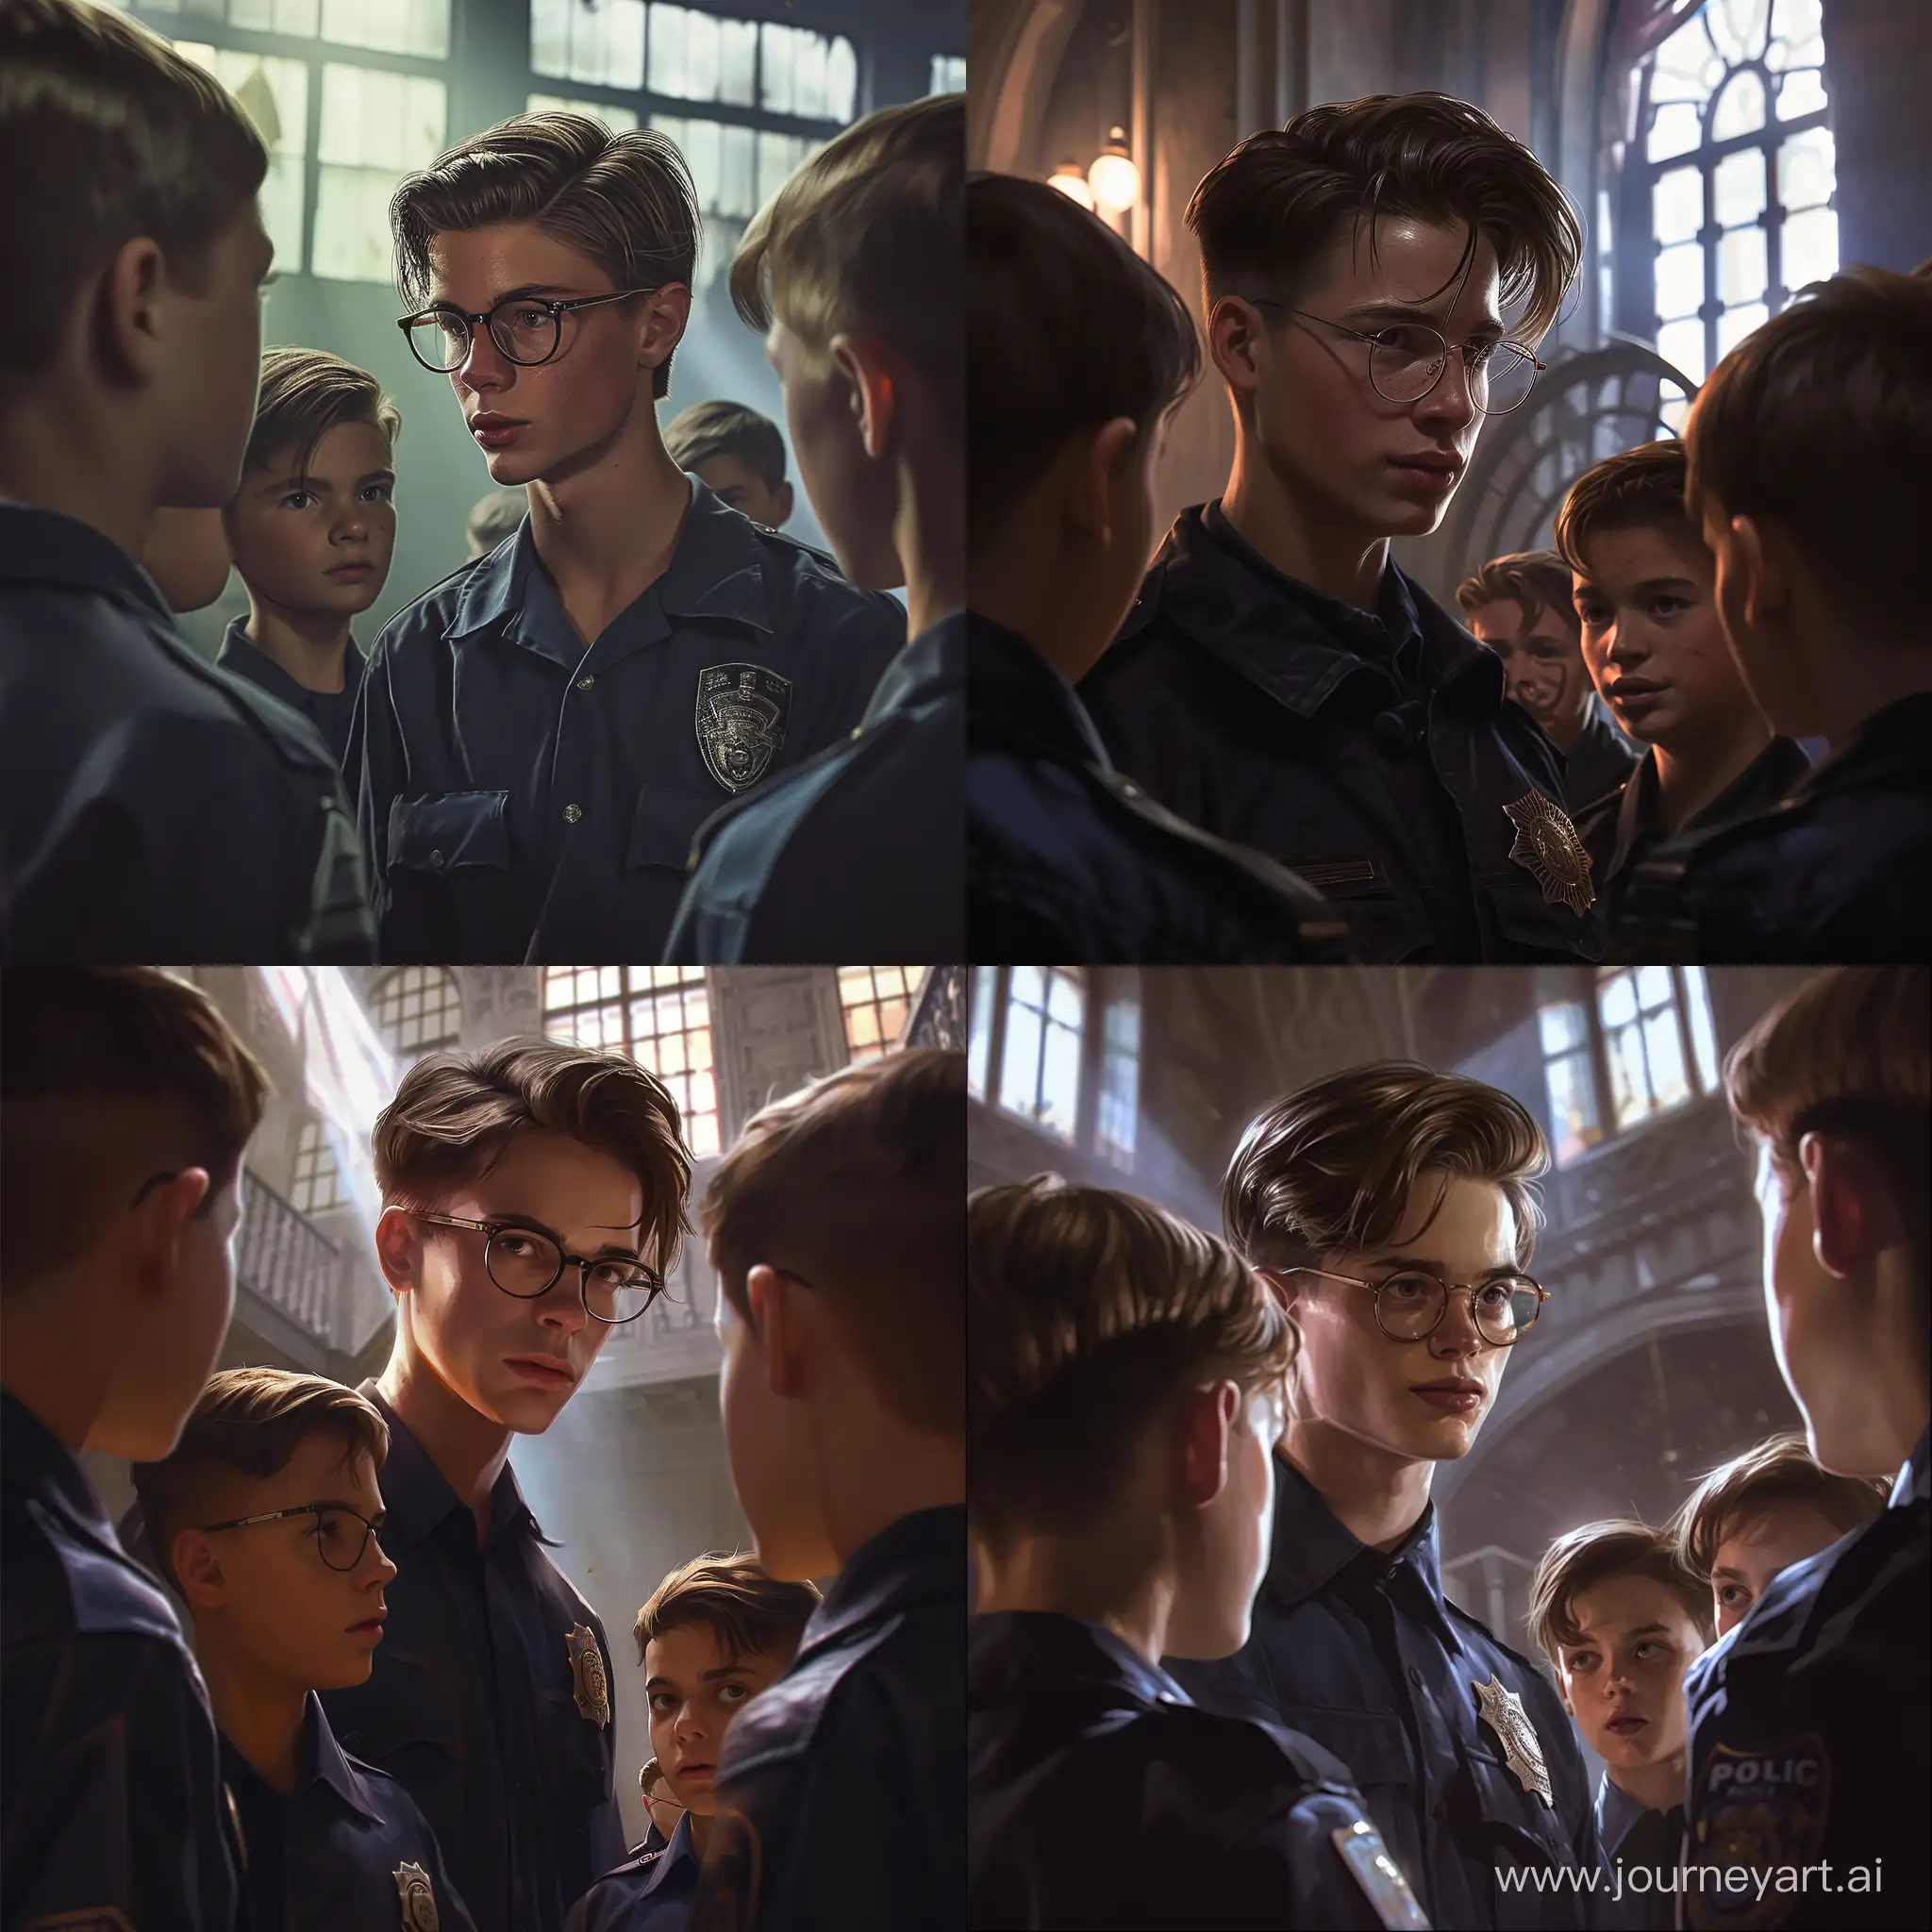 A 17-year-old guy with a bob and glasses holds a meeting with police officers consisting of 14-year-old boys, in the style of the 20th century. The scene takes place in an old building that resembles a youth police academy. The lighting is dim, creating a play of light and shadow. The guy looks confident and authoritative while the police boys listen to him attentively. The image should be made in the style of 20th century realism, with an emphasis on details